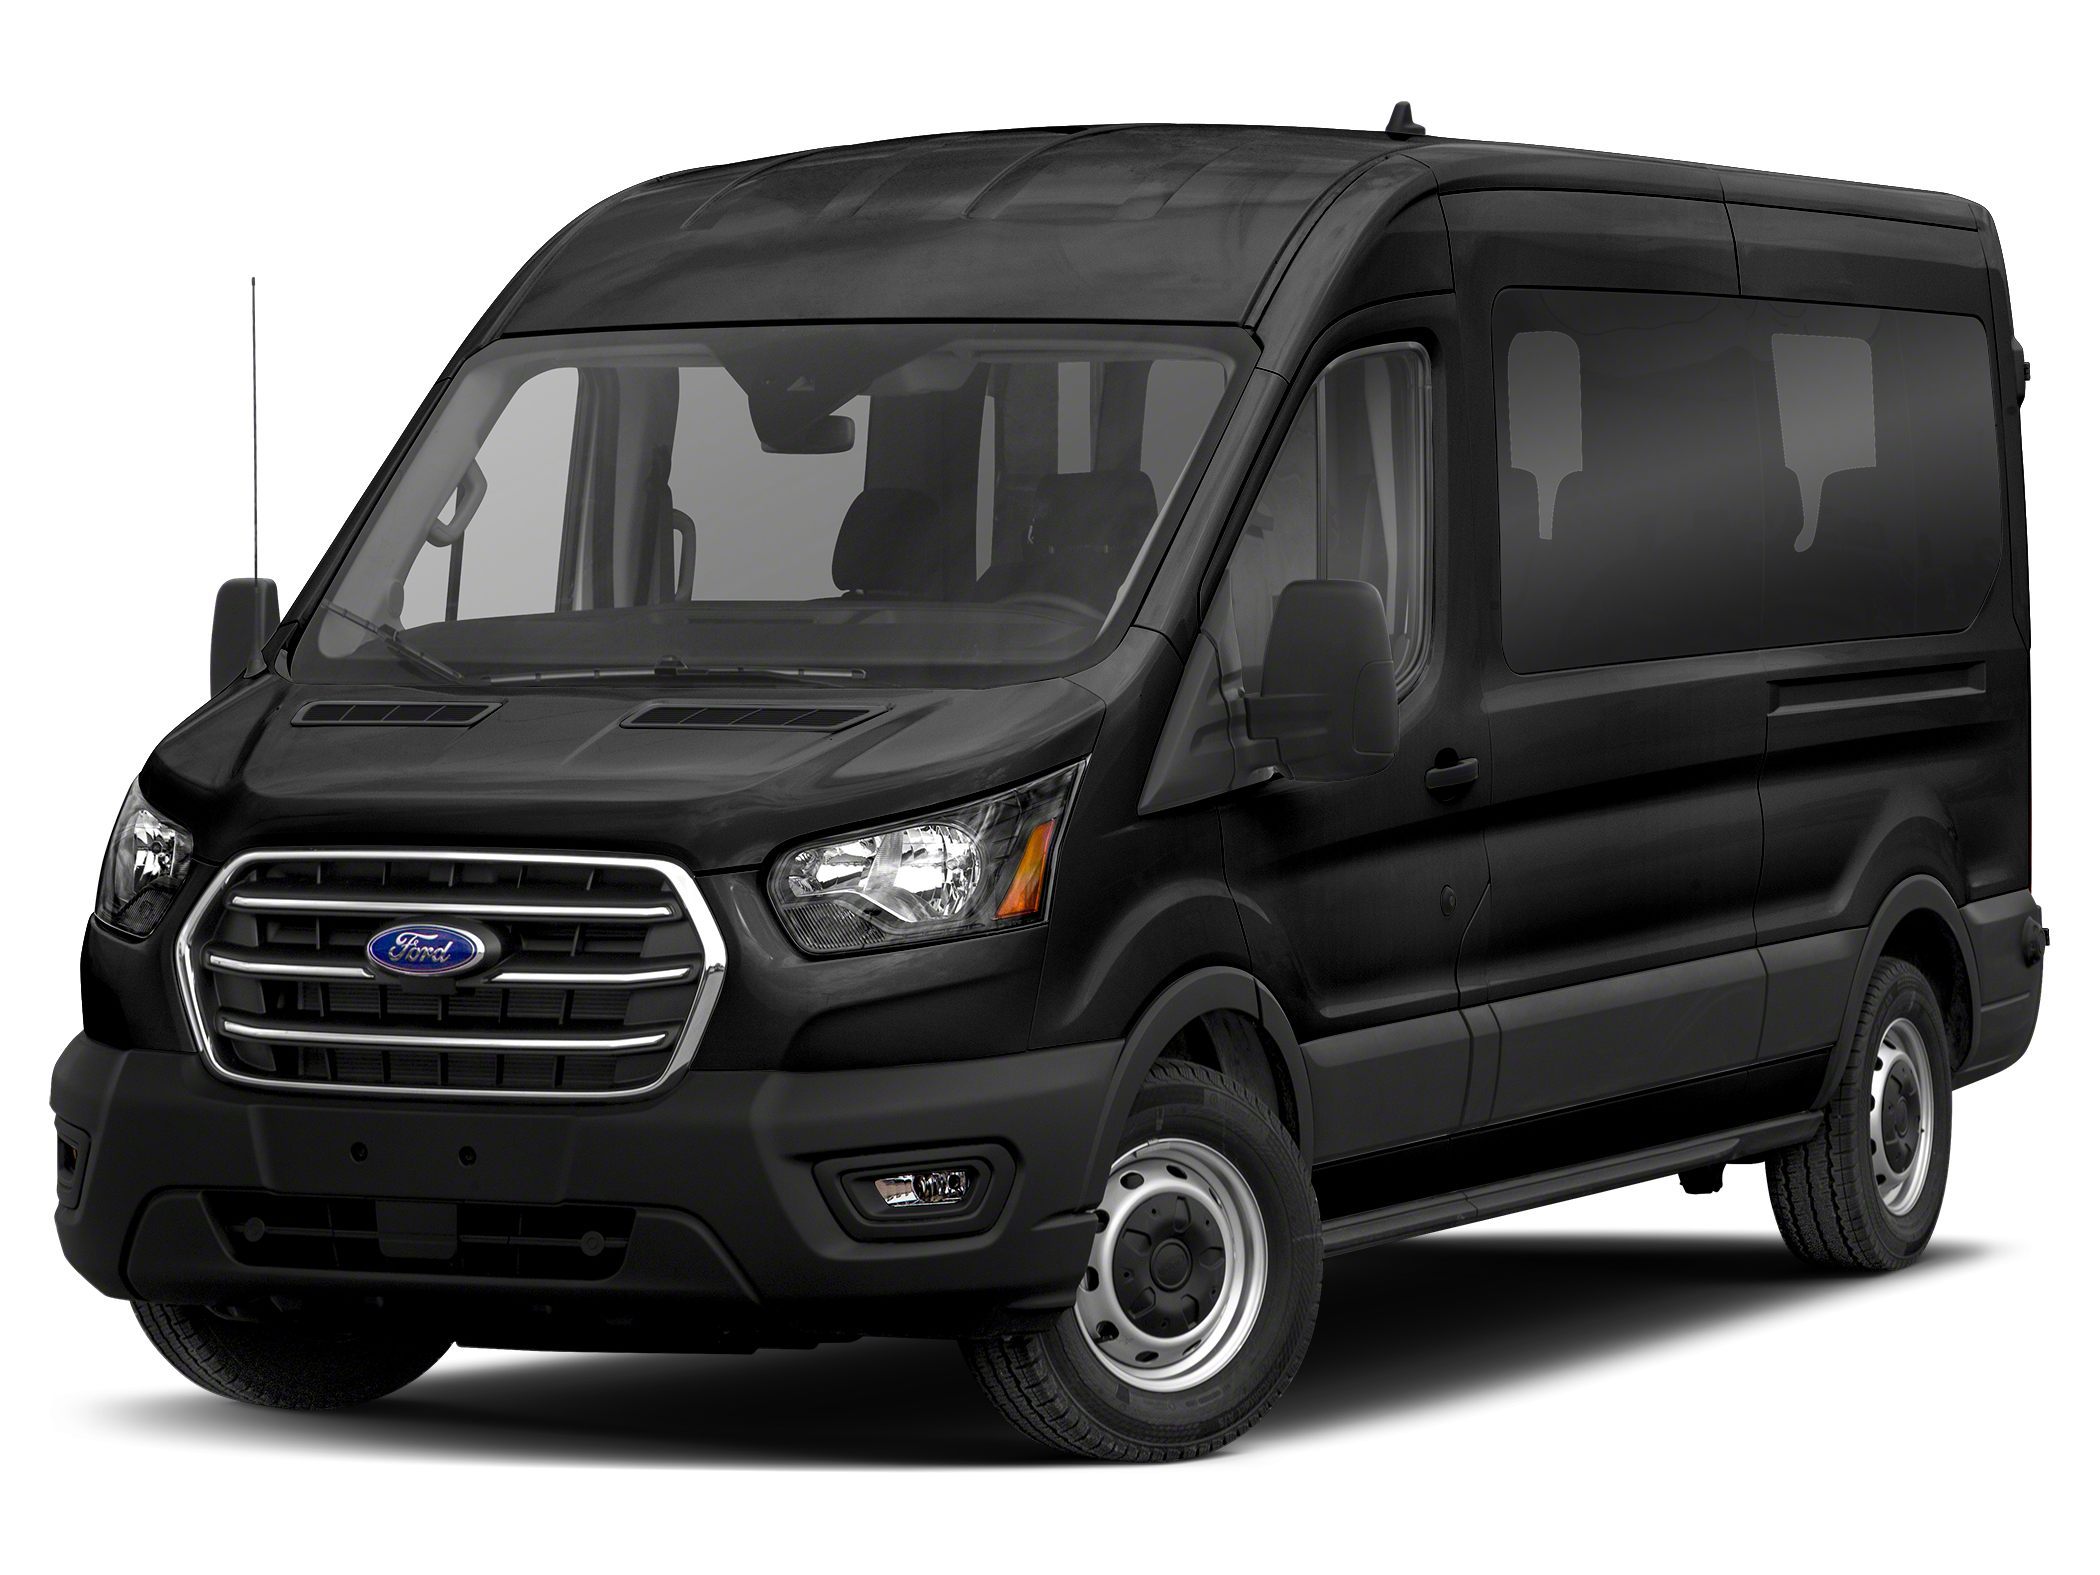 Used 2020 Ford Transit-350 Passenger Wagon Medium Roof Van For Sale in New  Orleans, LA | 45527